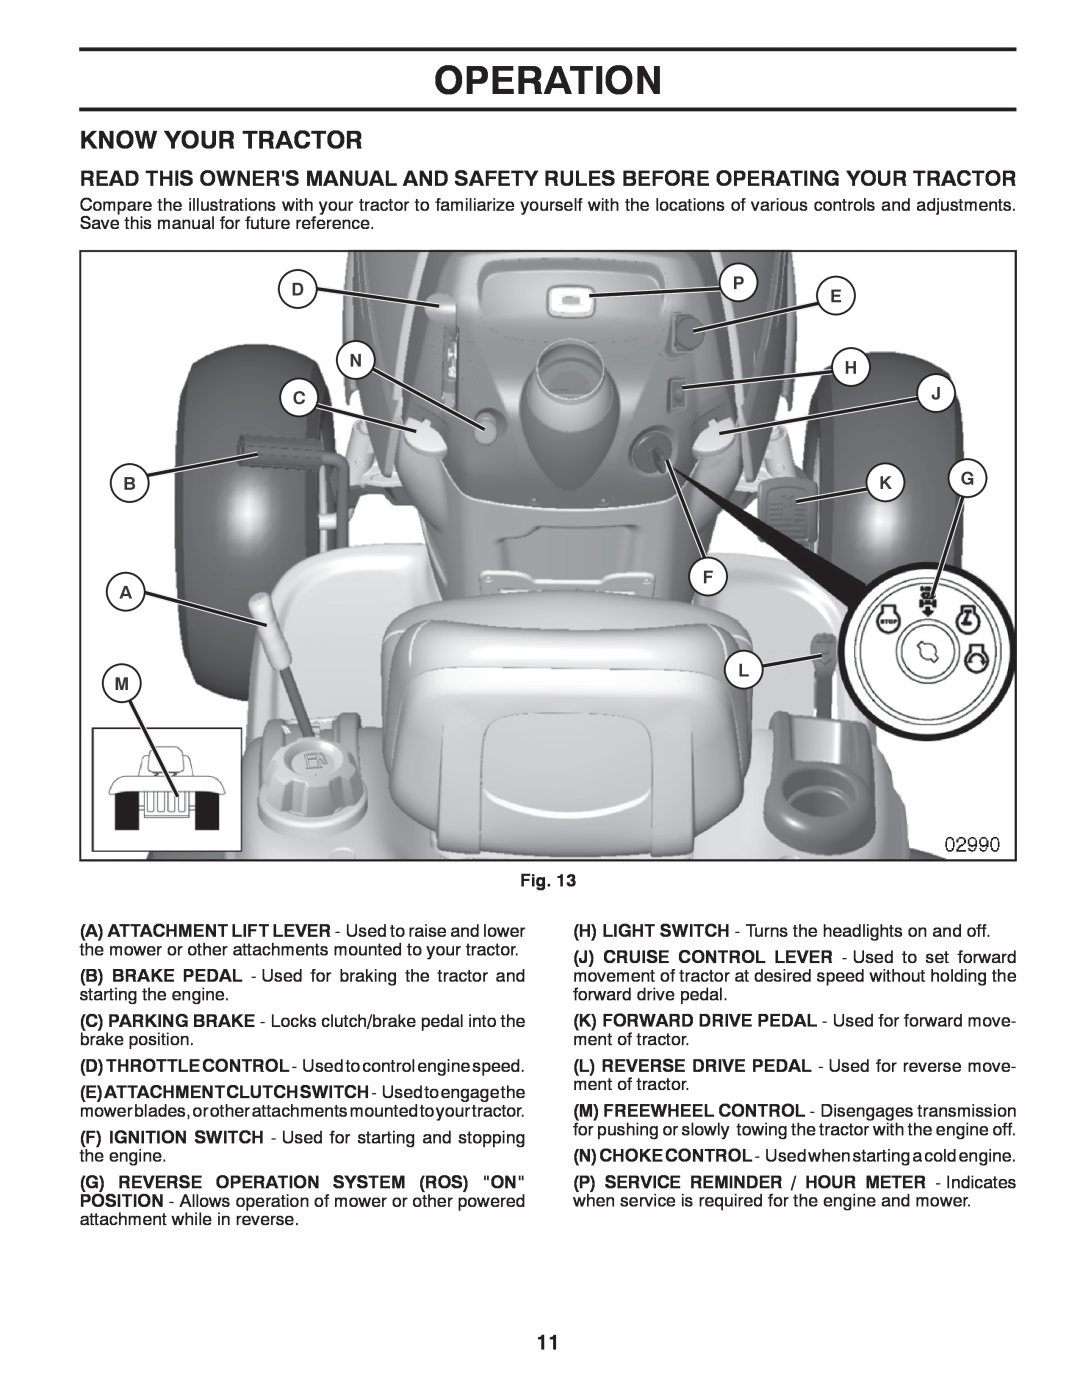 Poulan XT22H54 manual Know Your Tractor, Operation 